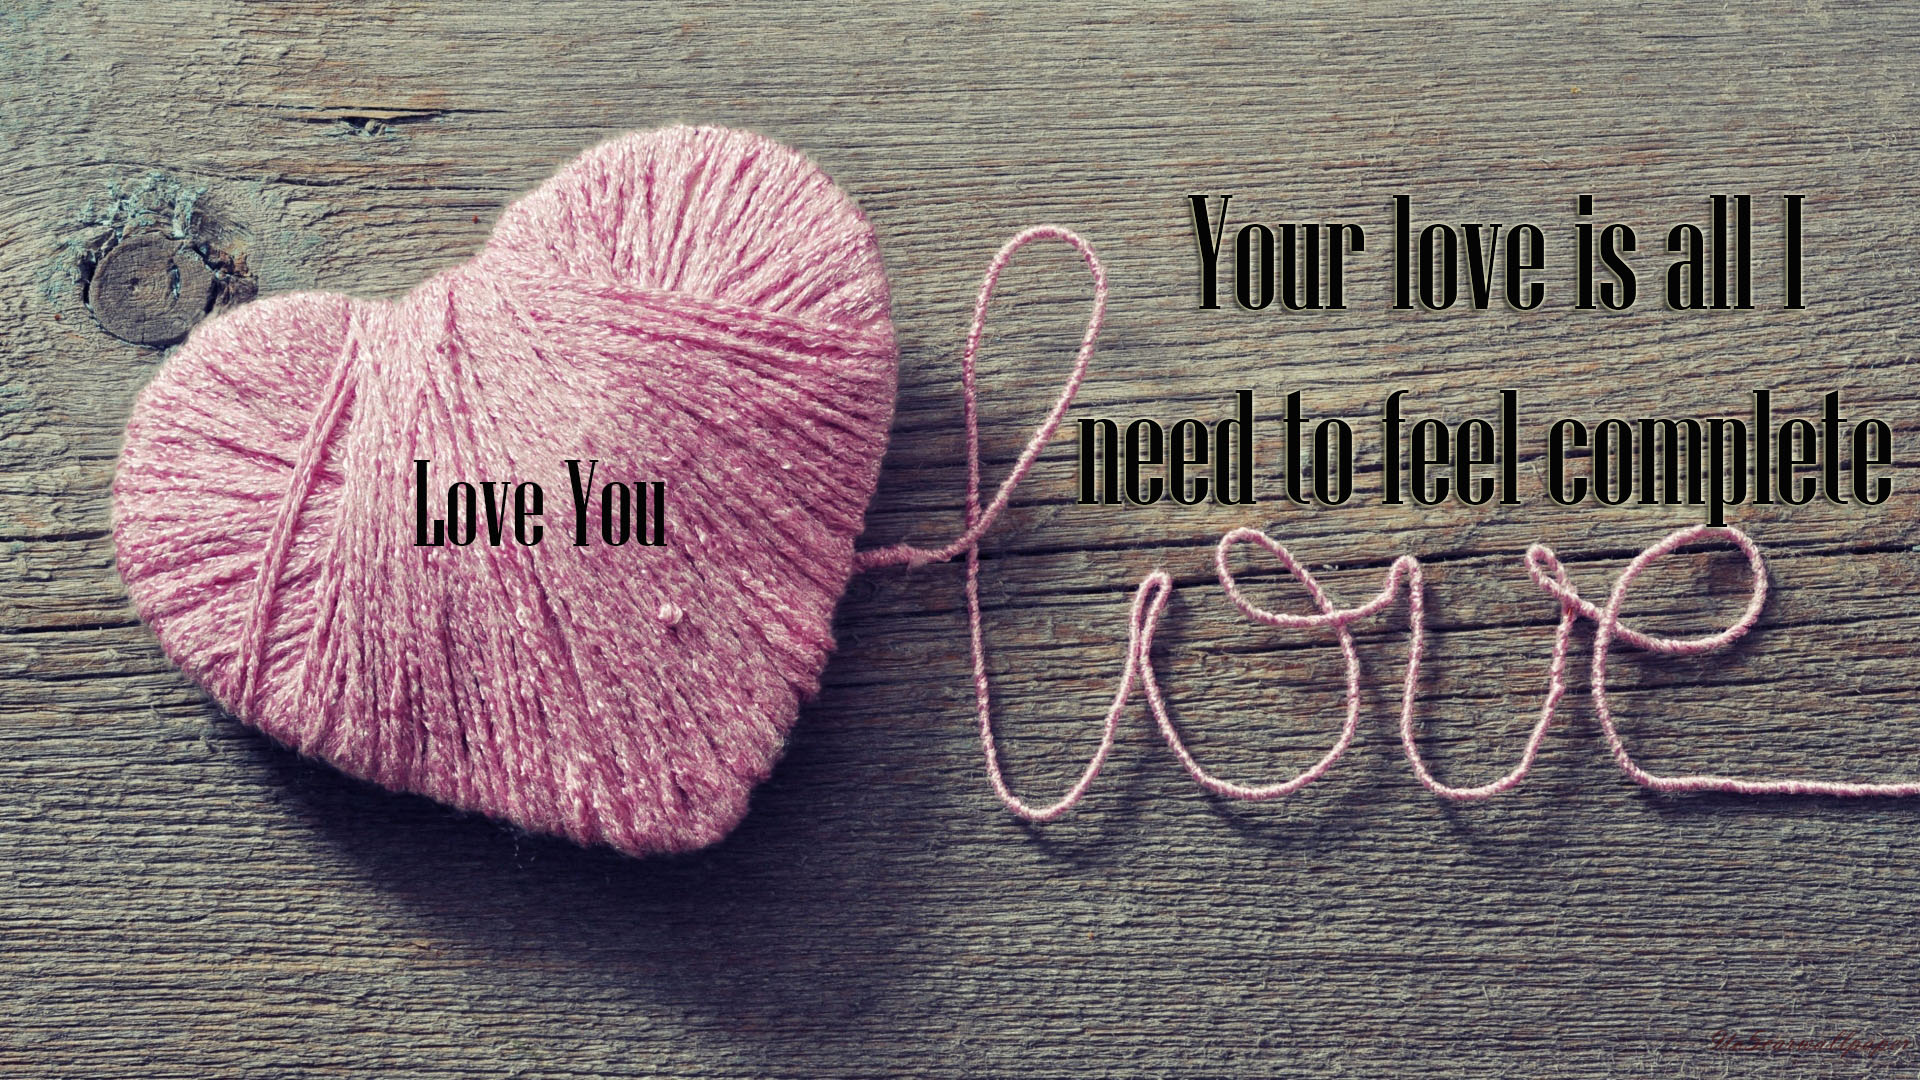 Love-Images-With-Quotes-and-Sayings-1